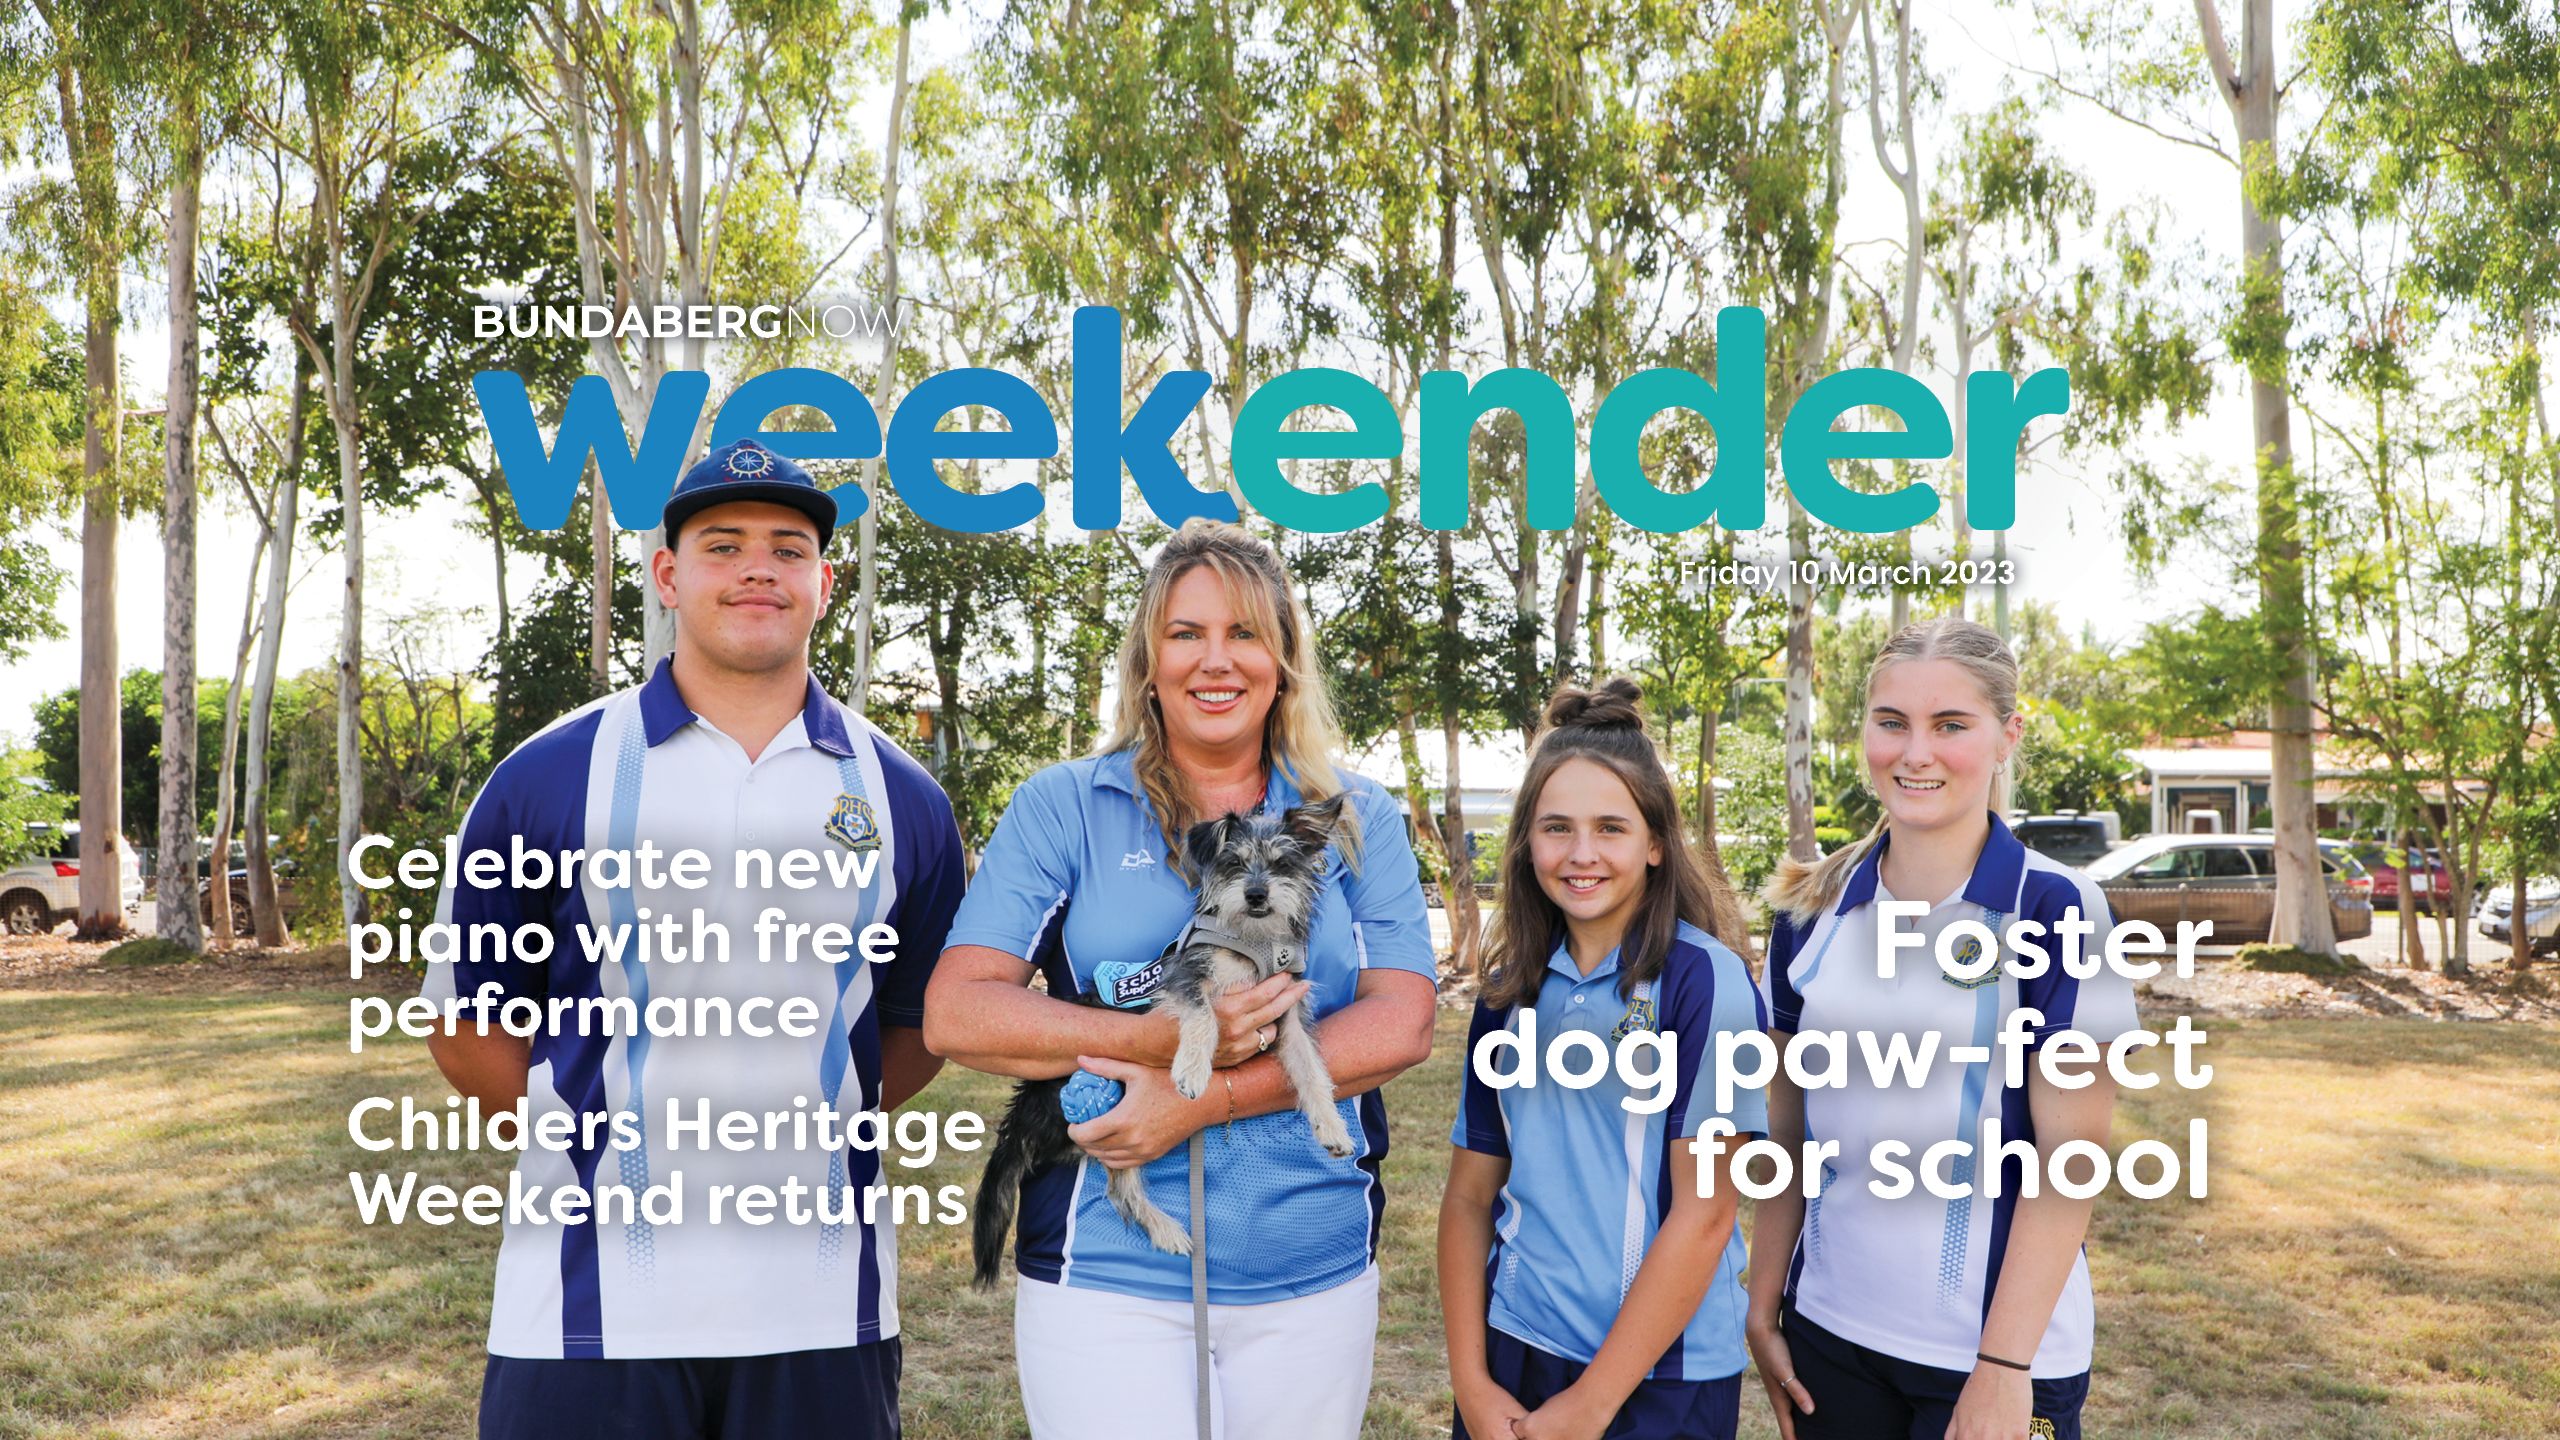 Weekender: Foster dog paw-fect for school